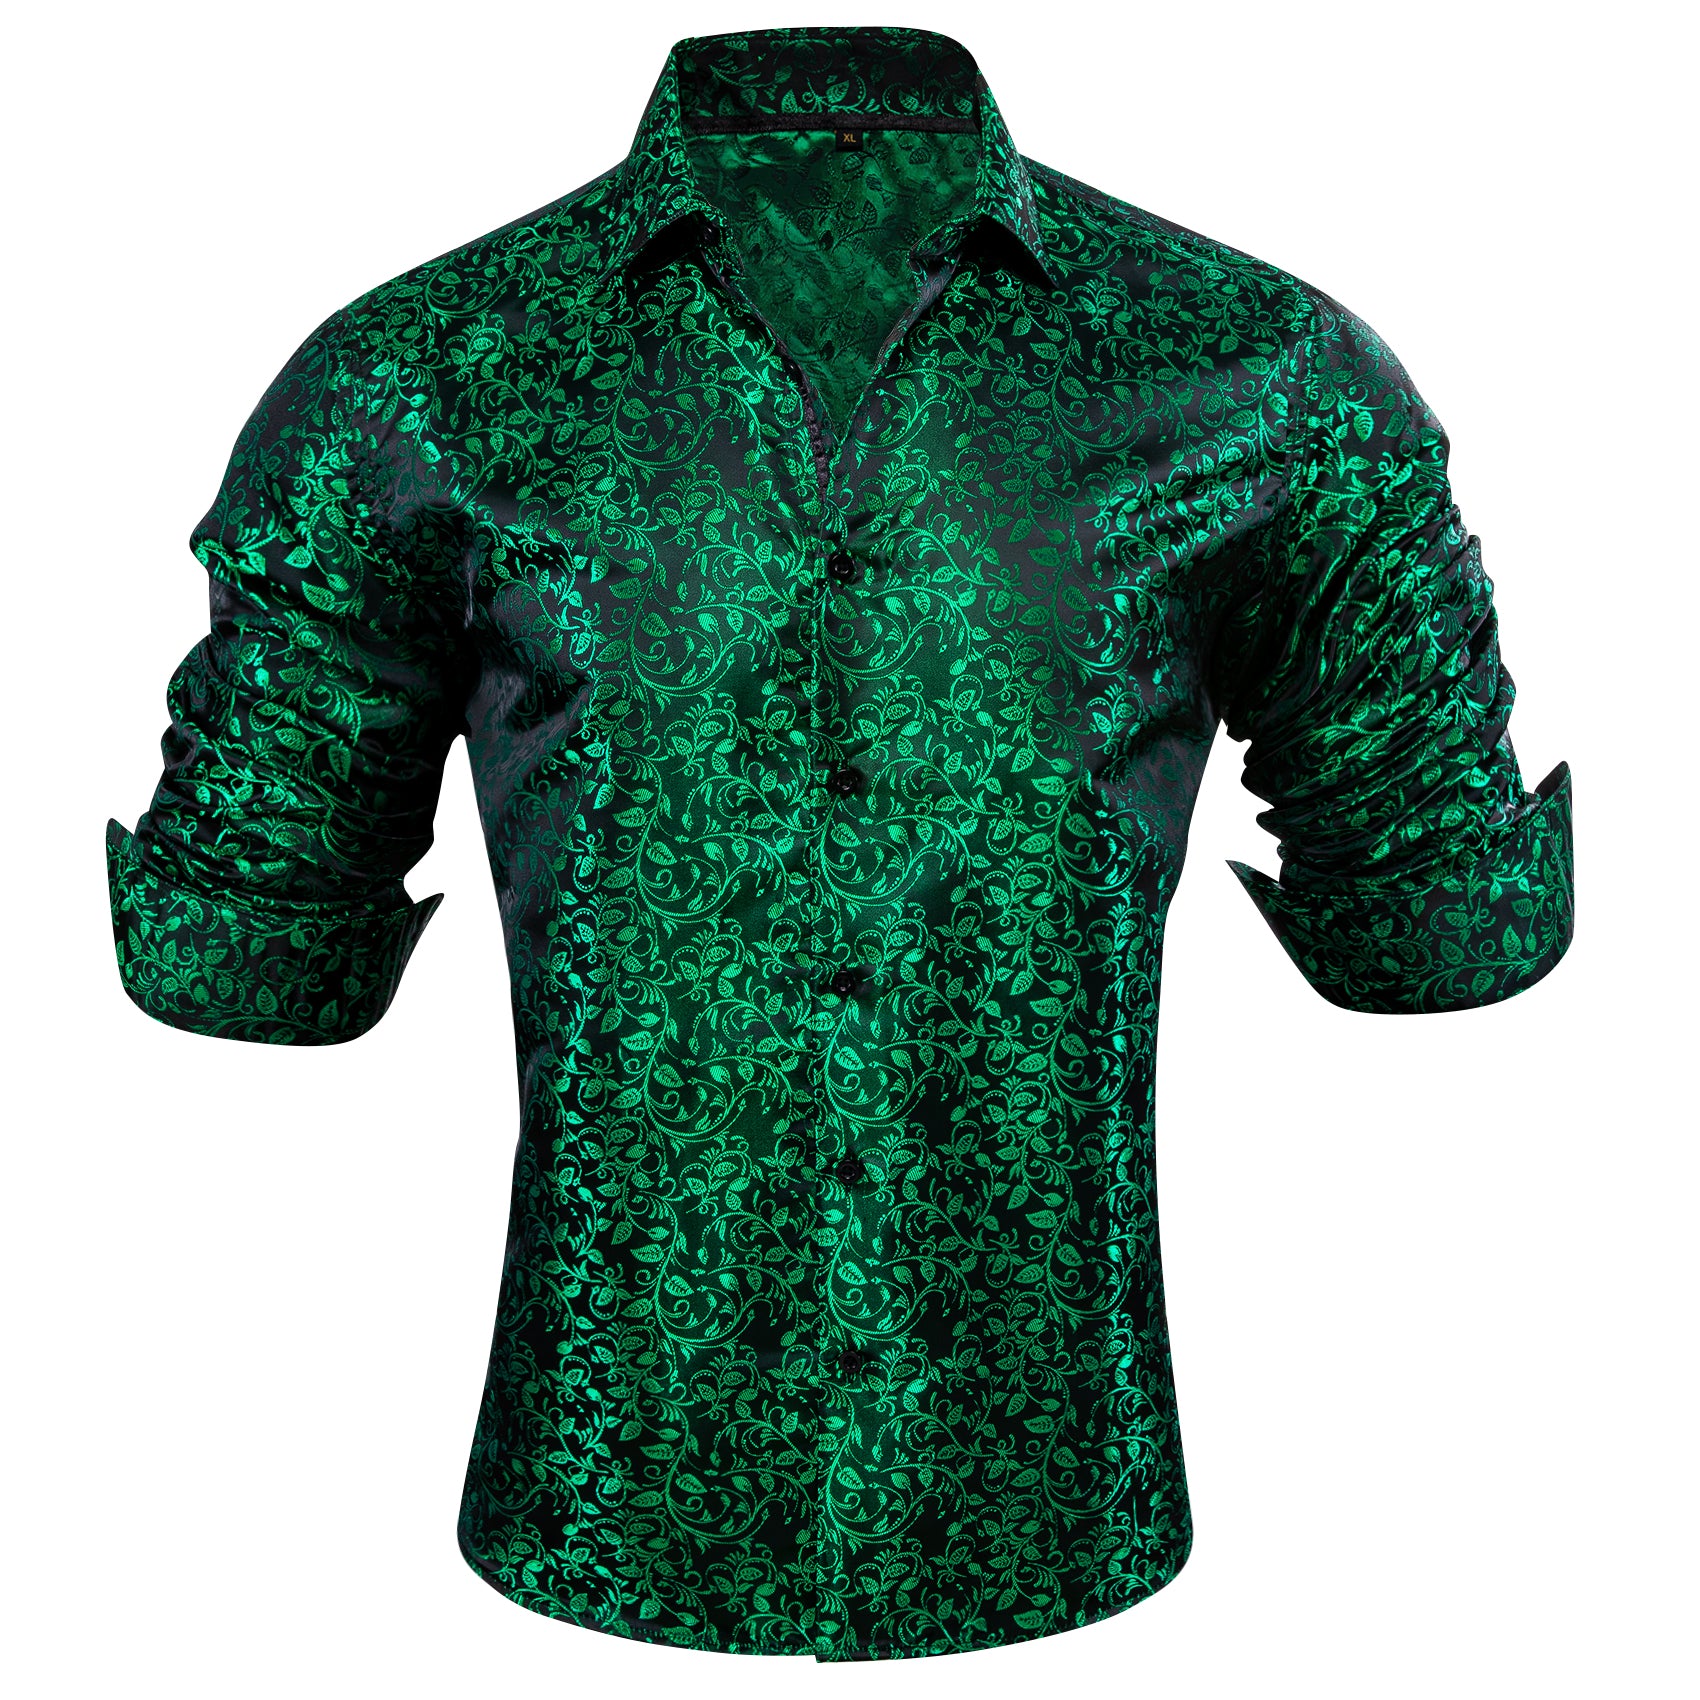 Barry.wang Luxury Green Leaves Floral Silk Shirt